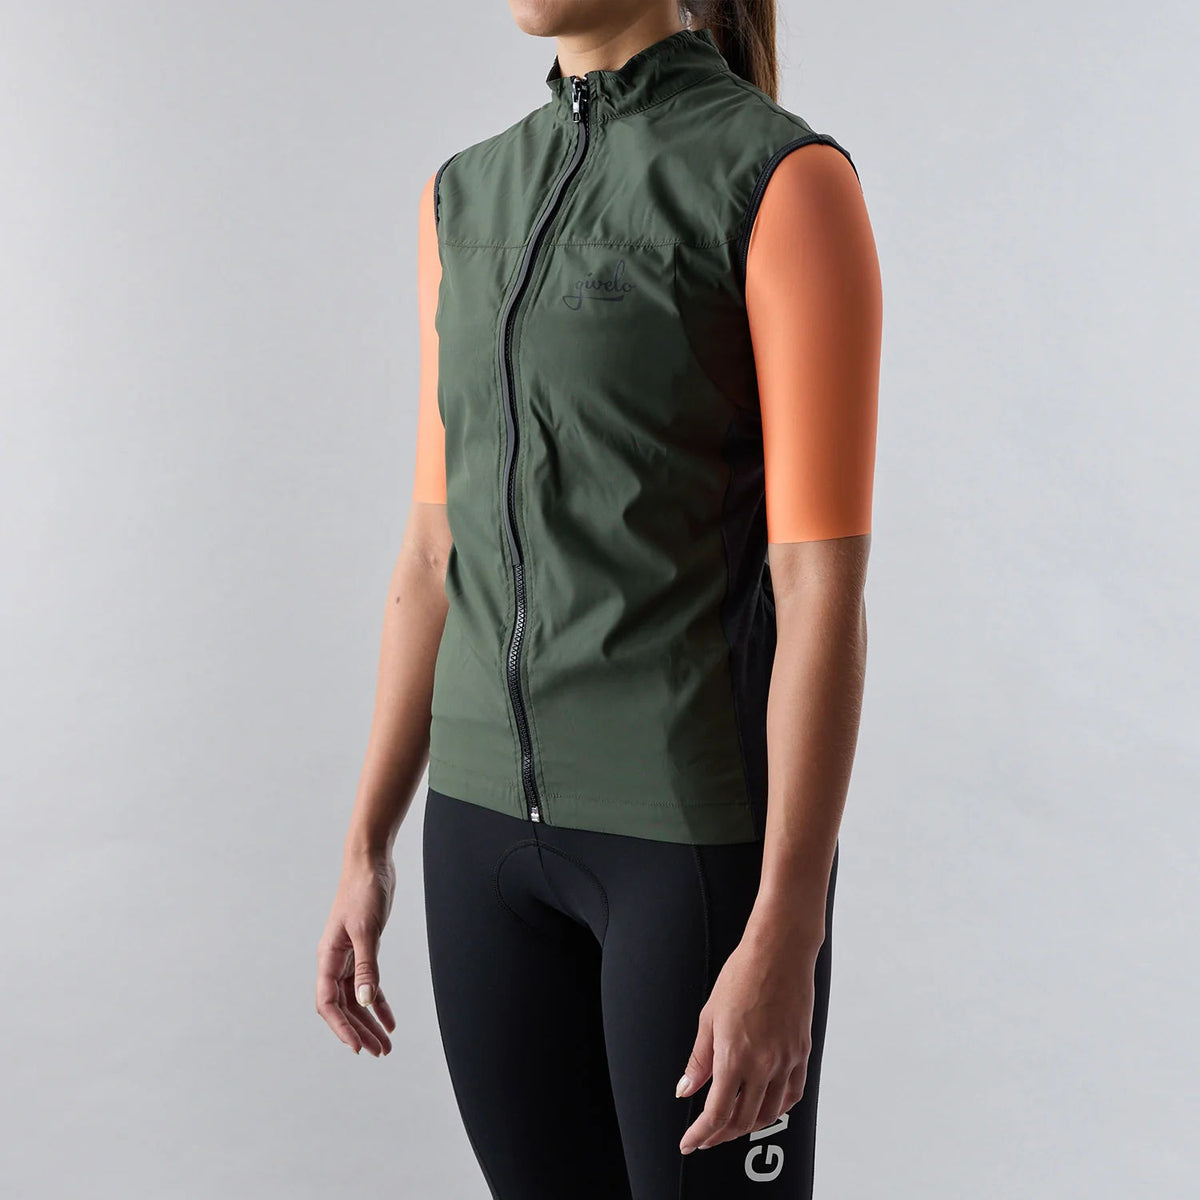 Givelo Quick-Free Gilet Military Green レディース サイクルジレ | GEARED